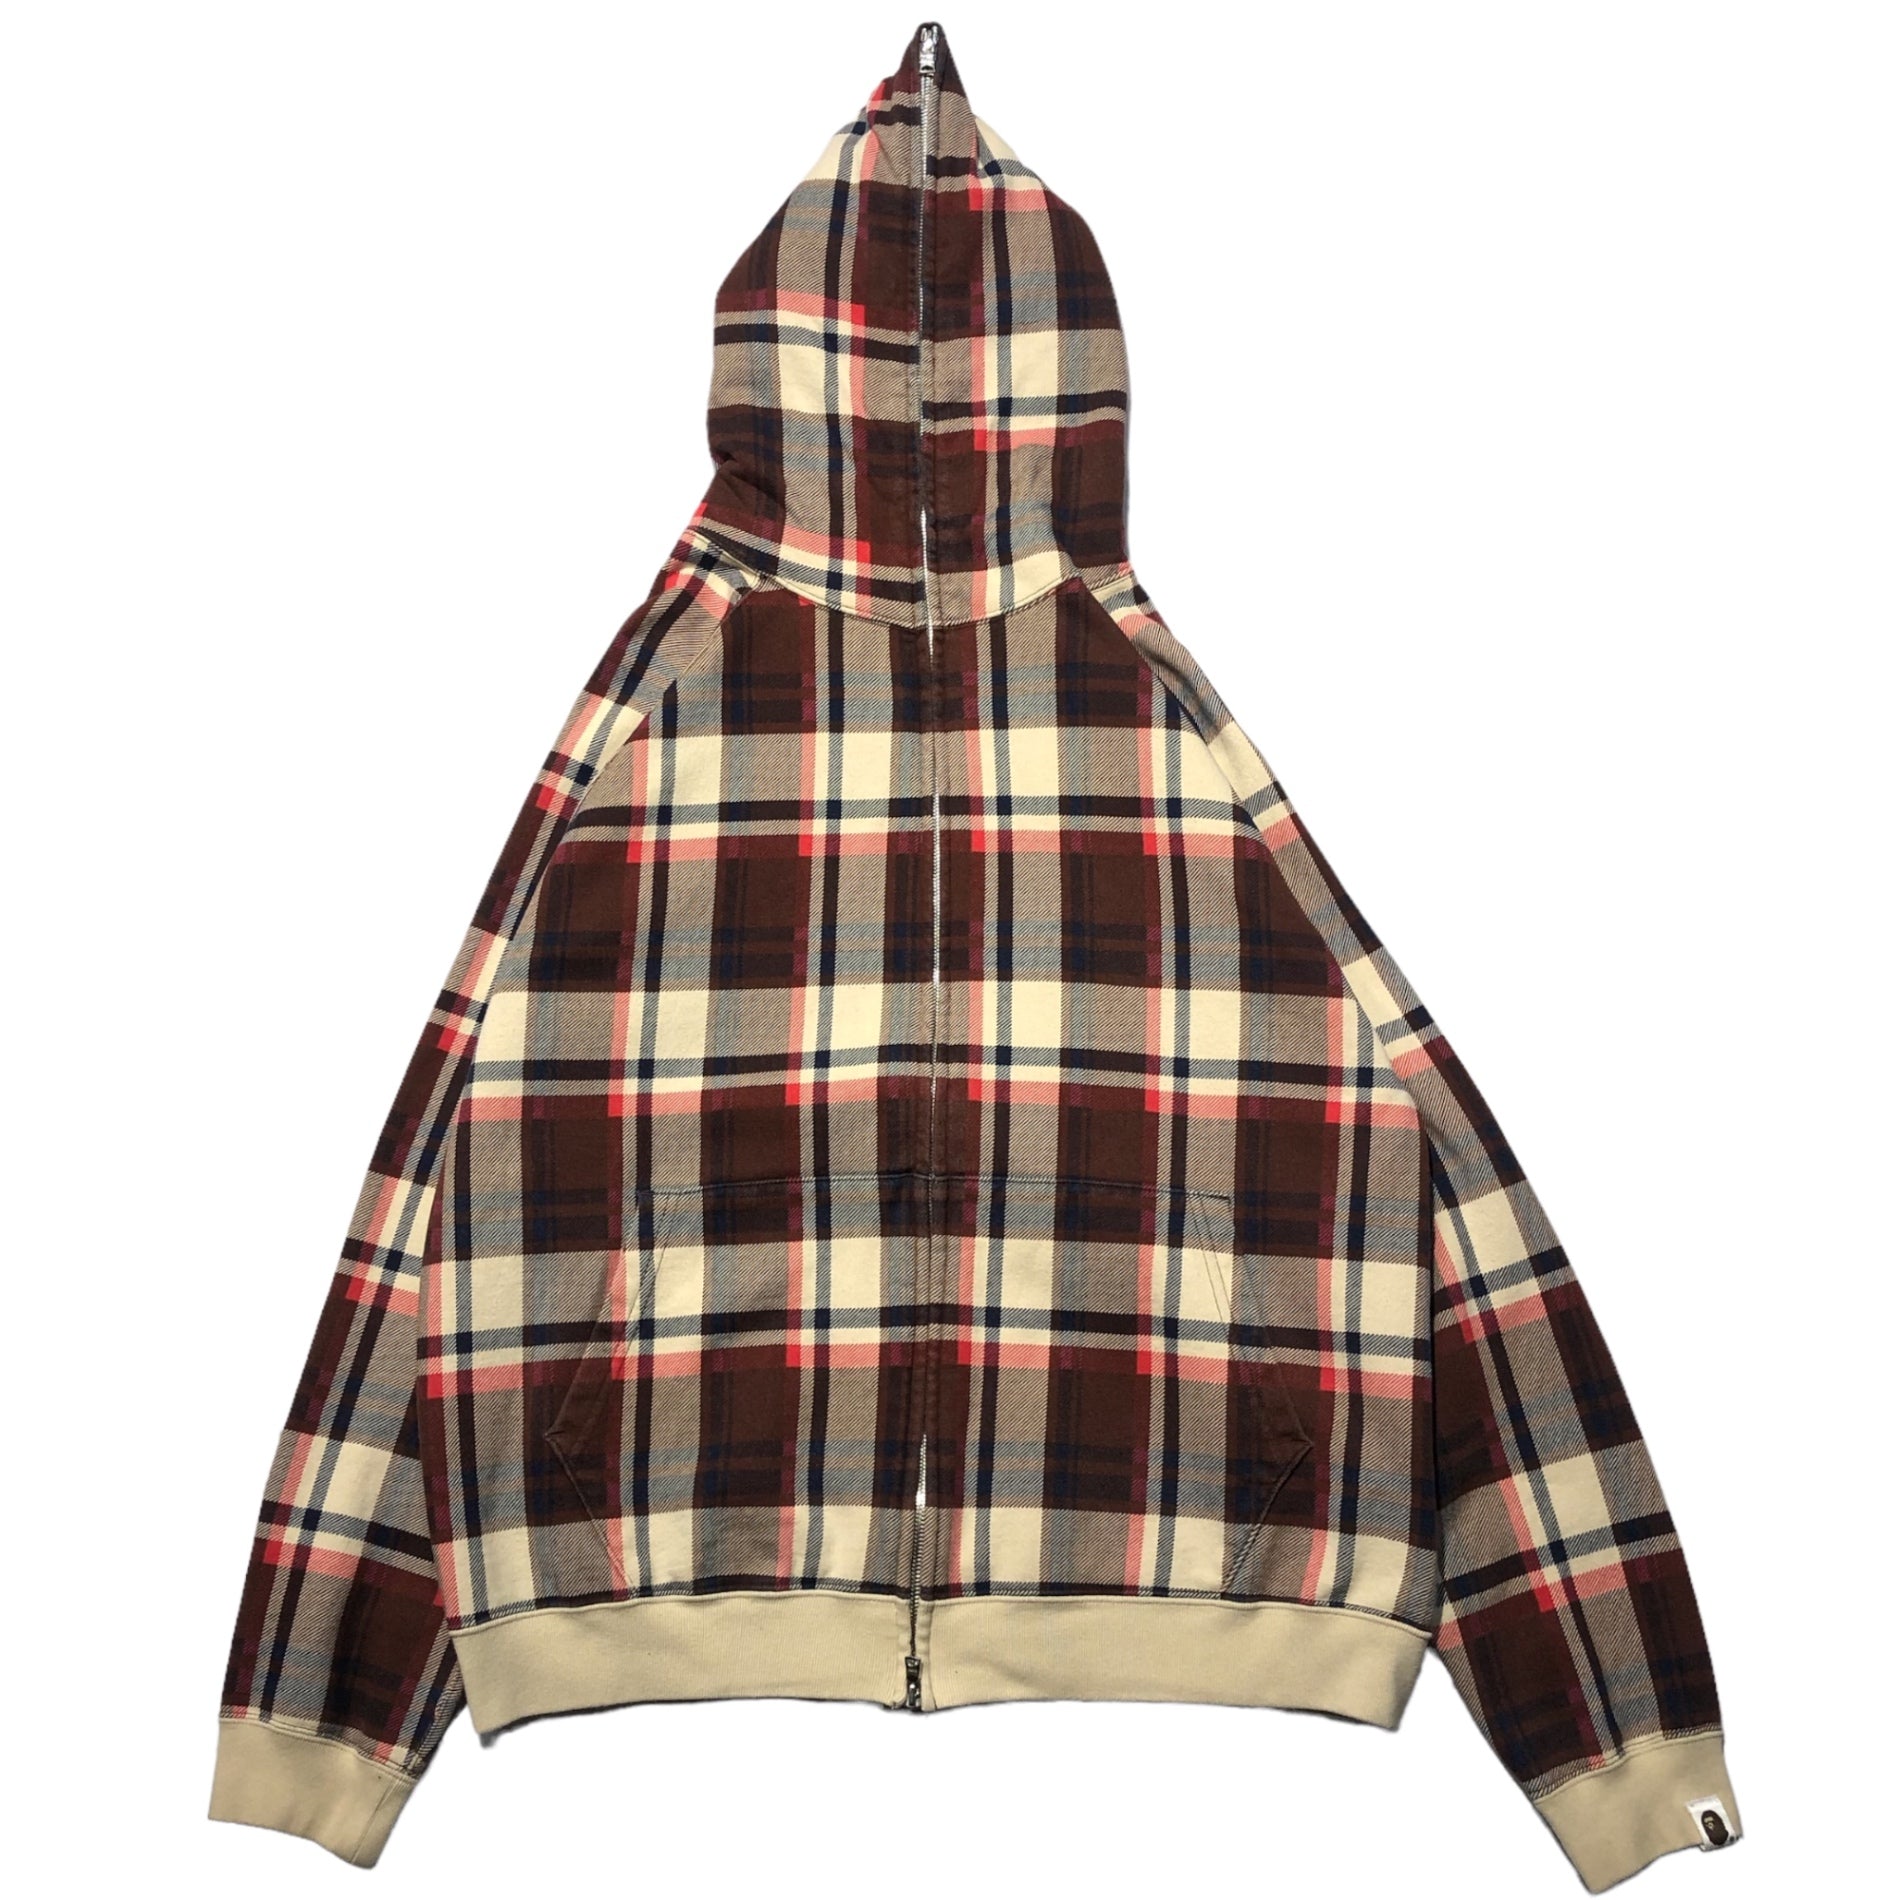 A BATHING APE(アベイシングエイプ) 00's CHECK ZIP UP PARKA チェック 